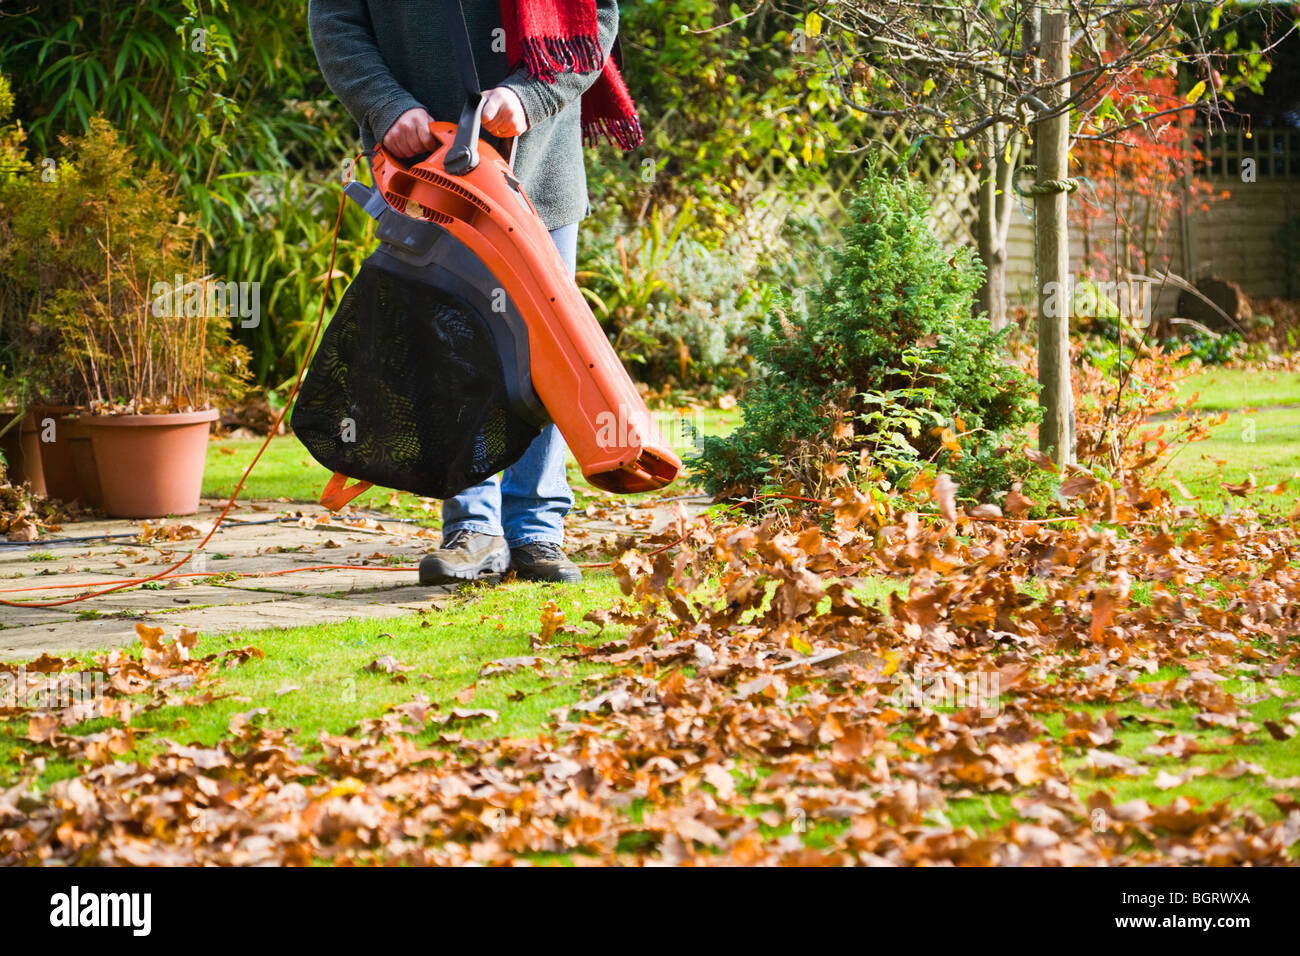 A man using a combination garden vac and leaf blower.  Blowing leaves off the lawn. Borders of Hampshire and Dorset. UK. Stock Photo